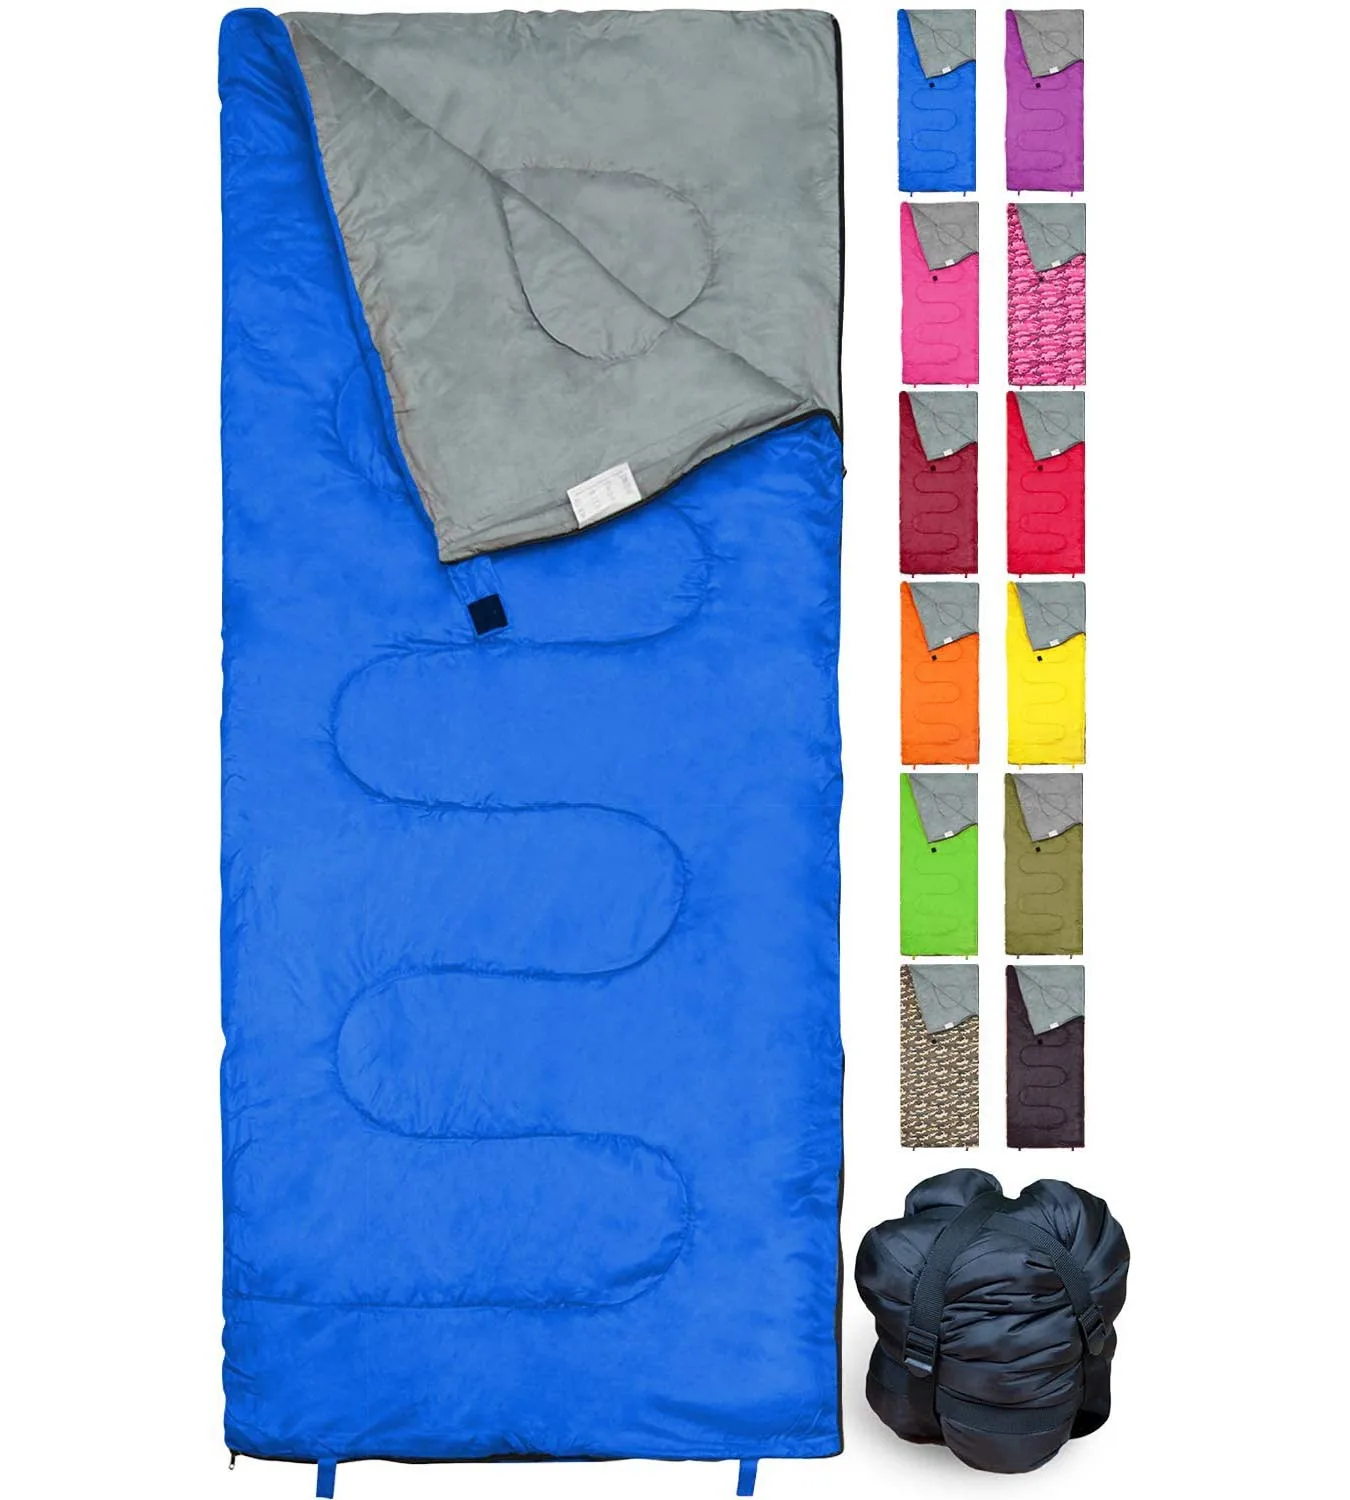 

Sleeping Bag Indoor&Outdoor Use.Great for Teens&Adults. Ultralight and Compact Bags are Perfect for Hiking, Backpacking&Camping, Customized color